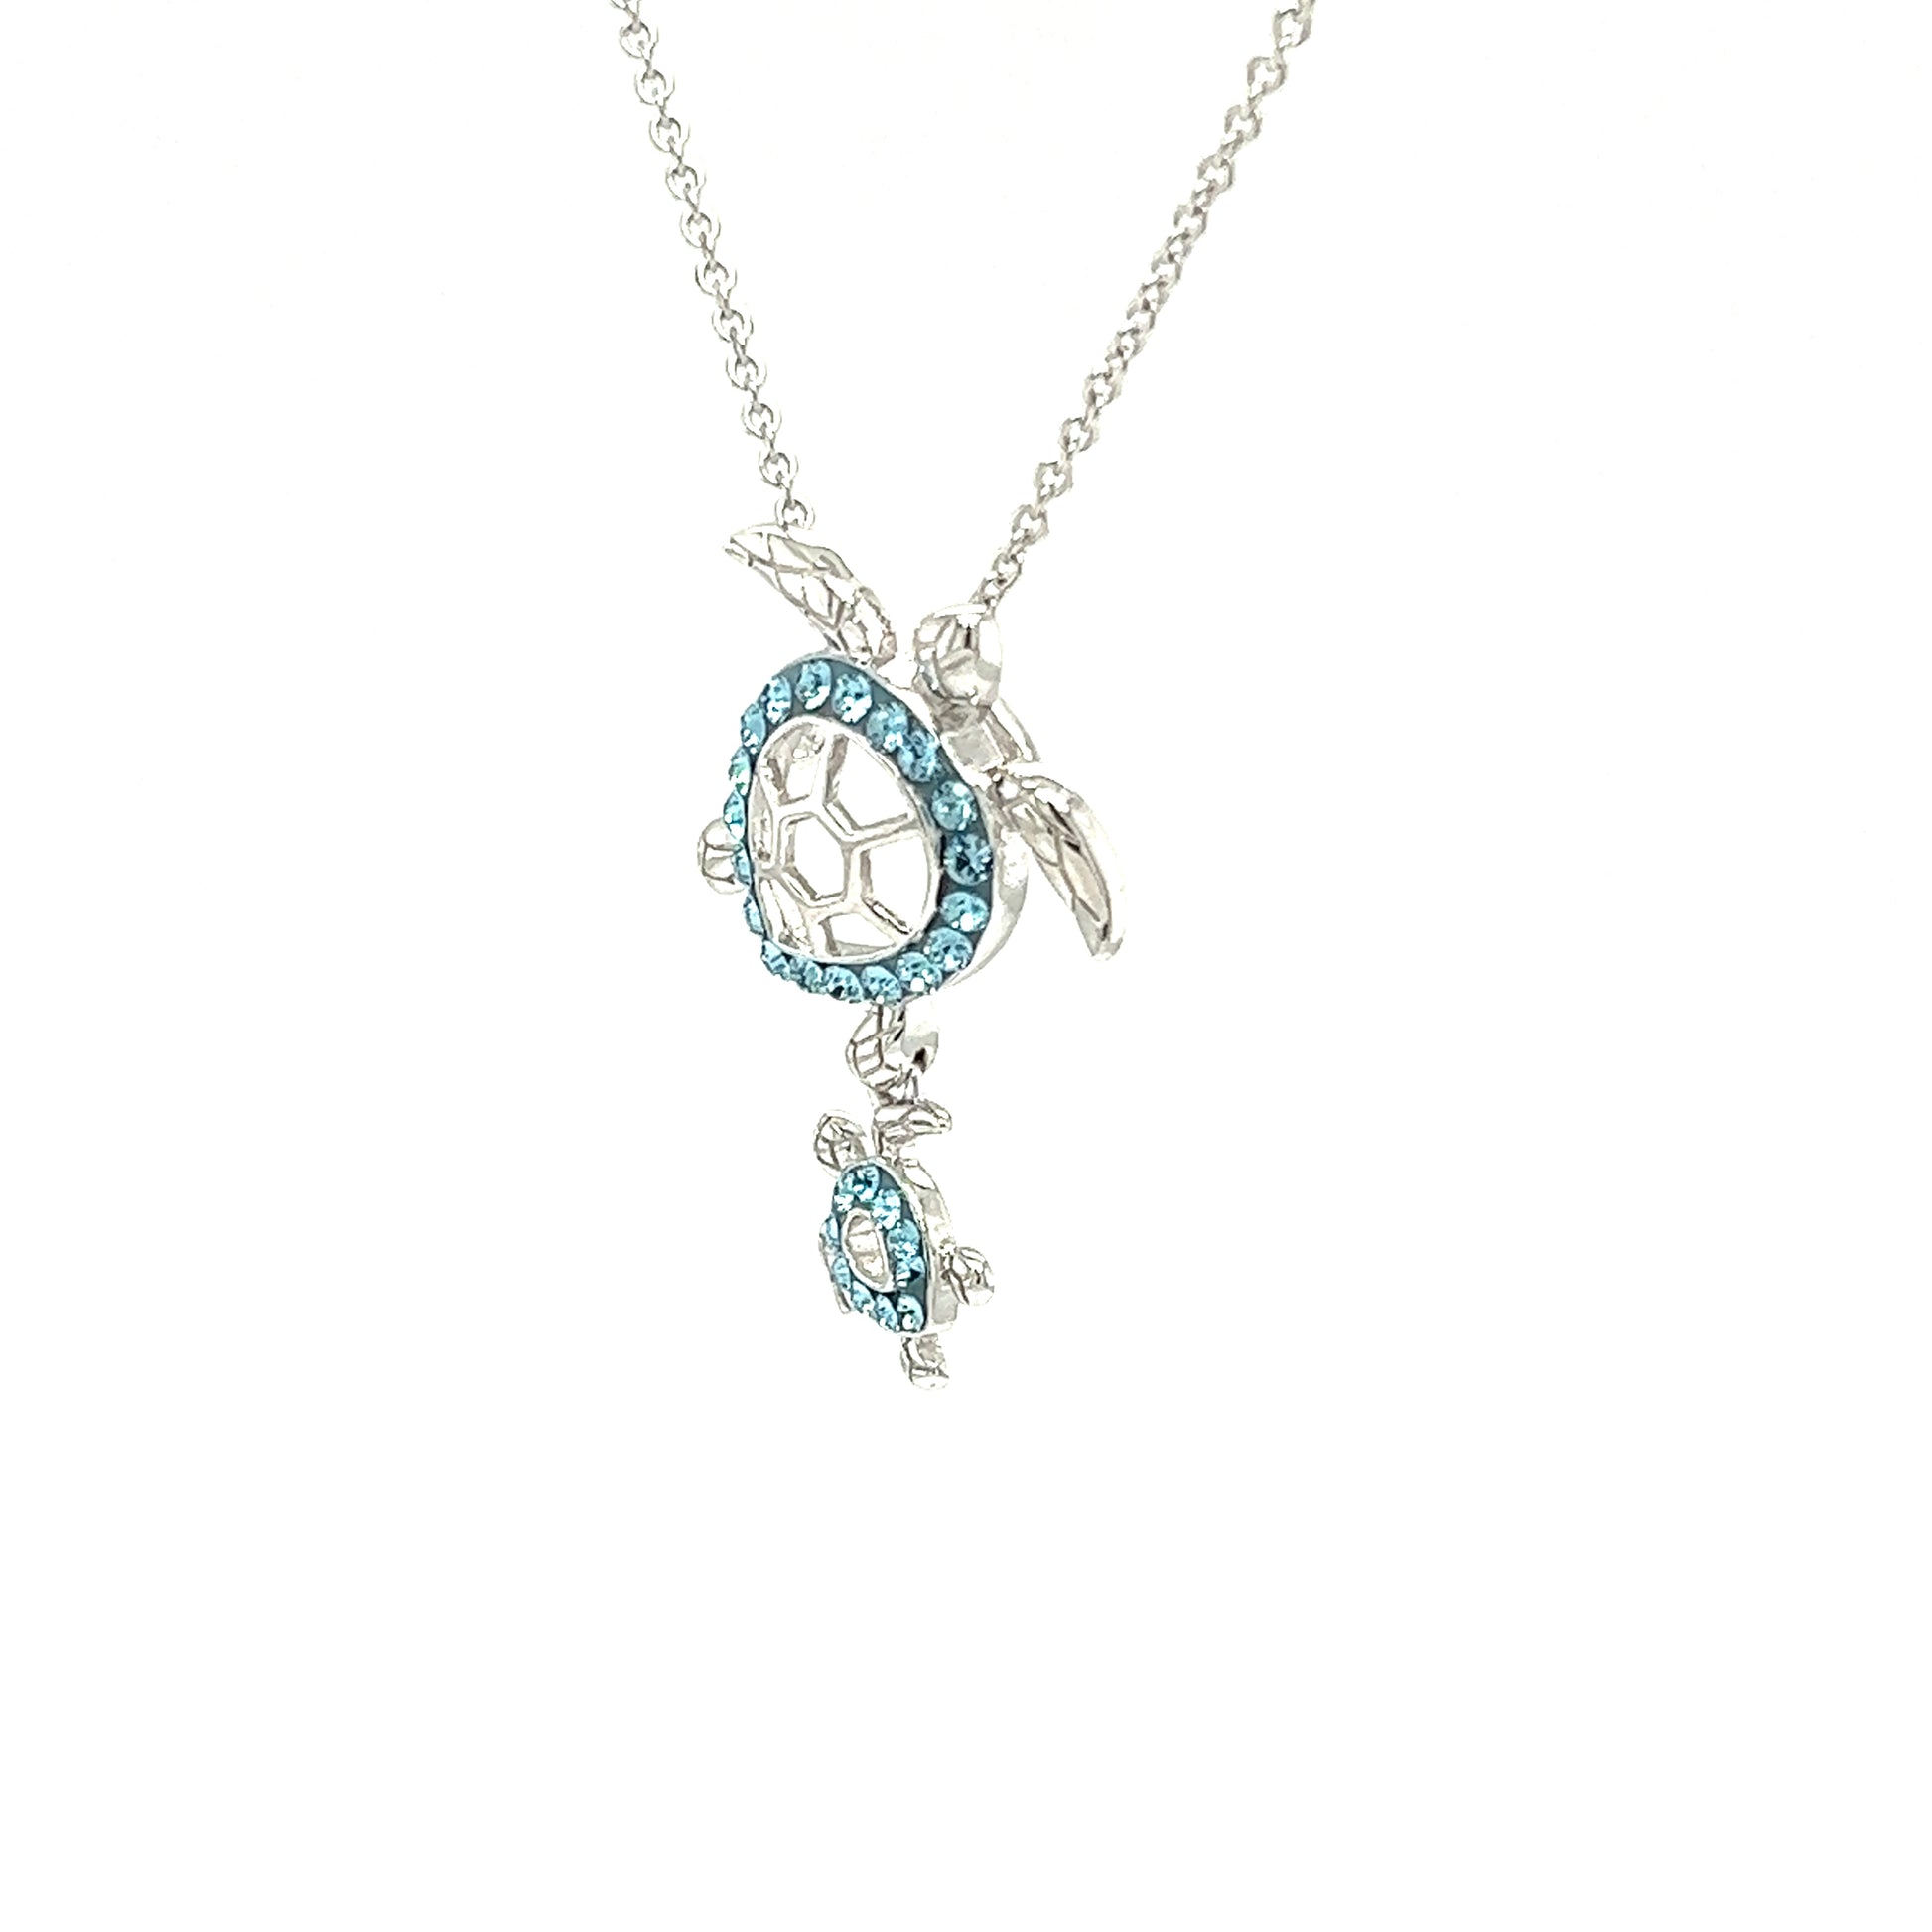 Mother and Baby Sea Turtle Necklace with Aqua Crystals in Sterling Silver Left Side View